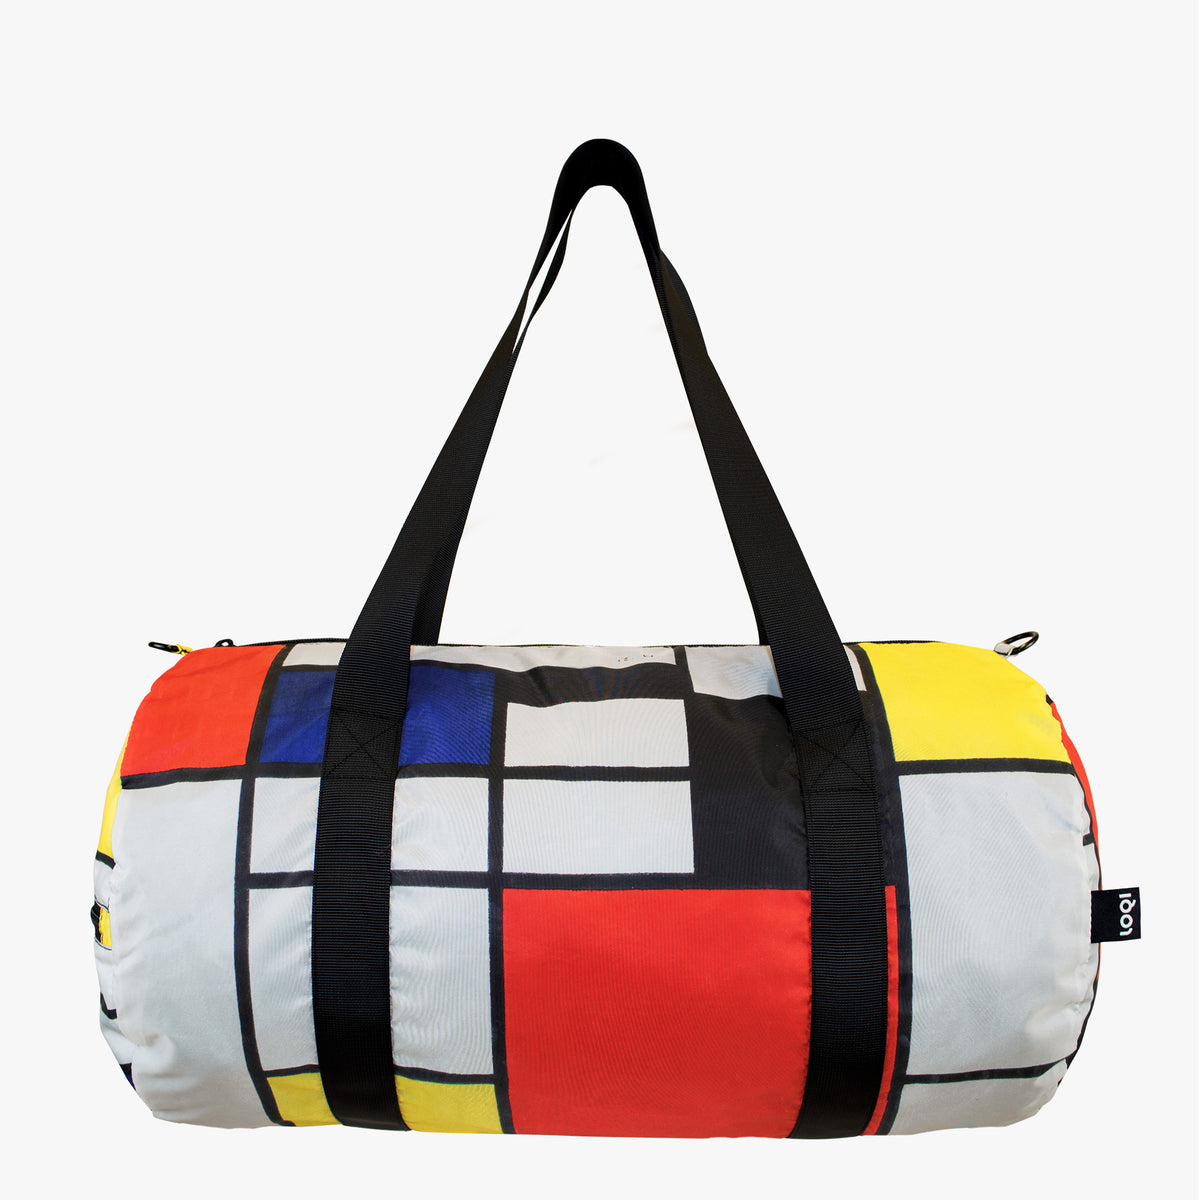 Composition with Red, Yellow, Blue and Black Recycled Weekender